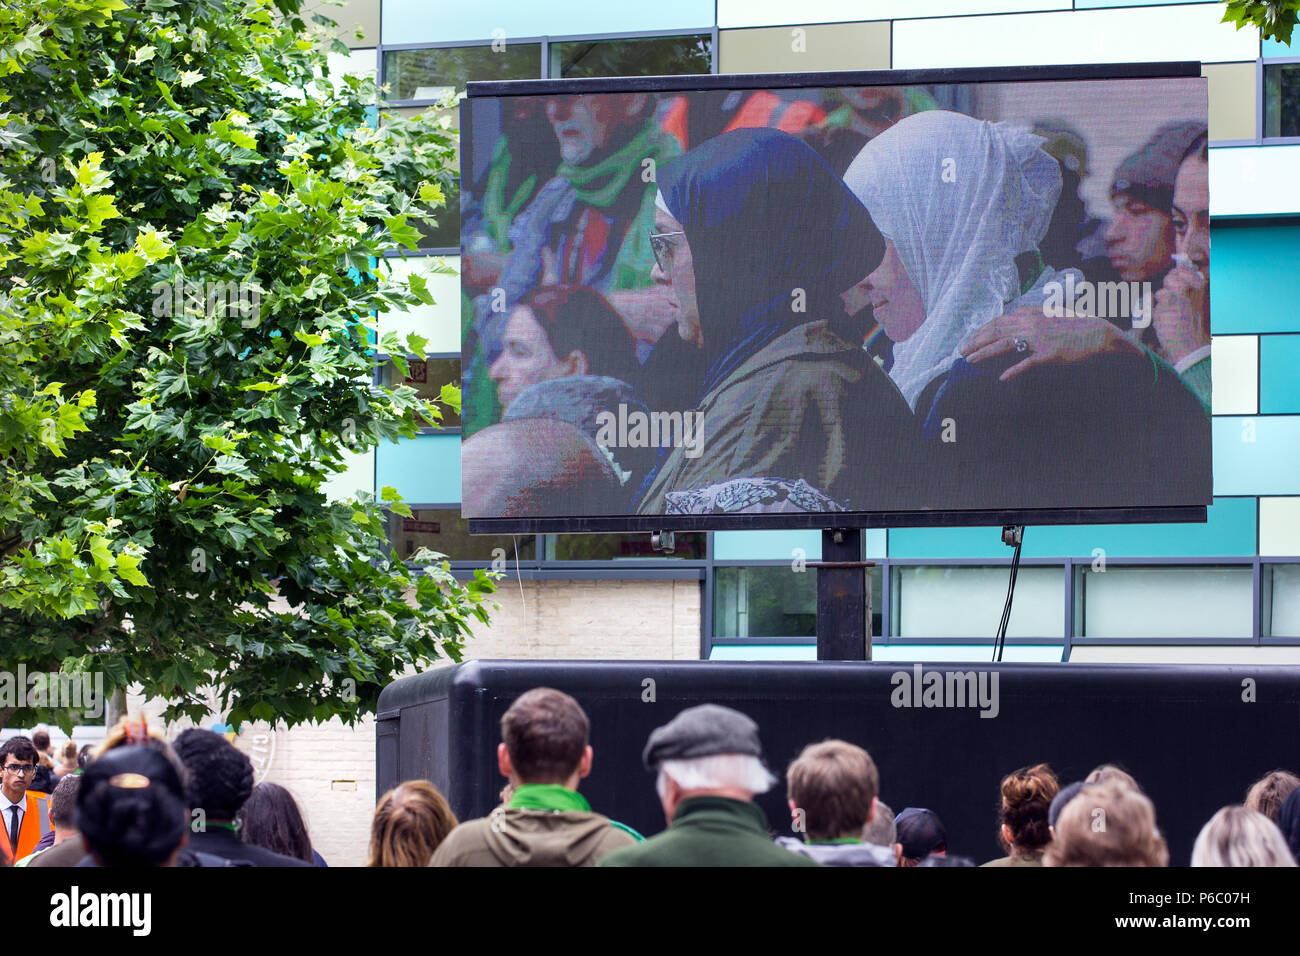 The first anniversary of the 24-storey Grenfell Tower block of public housing flats fire which claimed 72 lives. The outdoor TV screen televising the service.  South Kensington, London, UK, 14th June 2018. Stock Photo